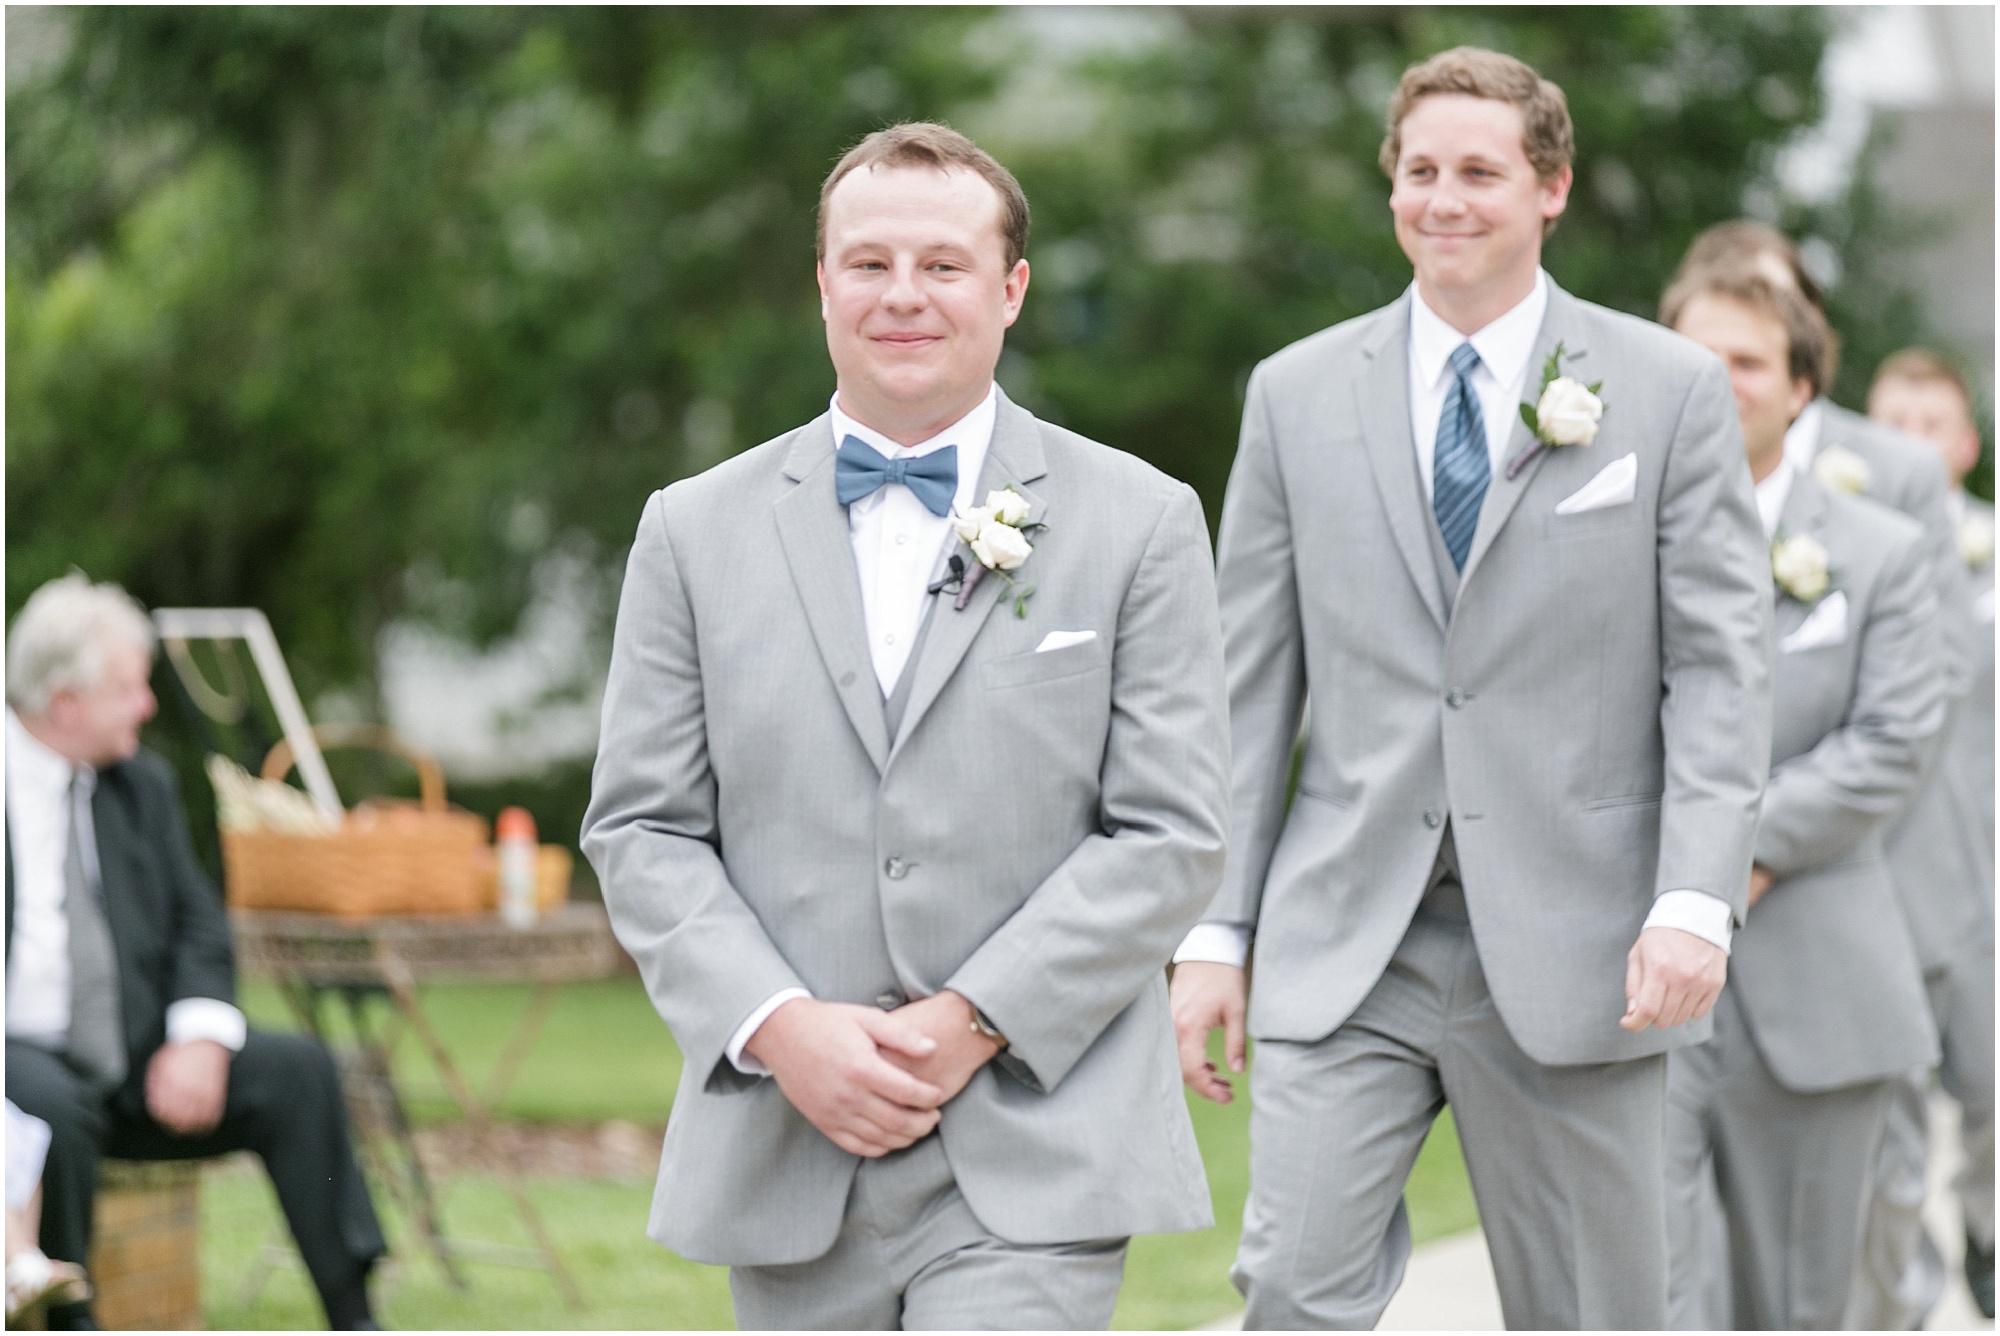 Groom walking in to the ceremony with his groomsmen.